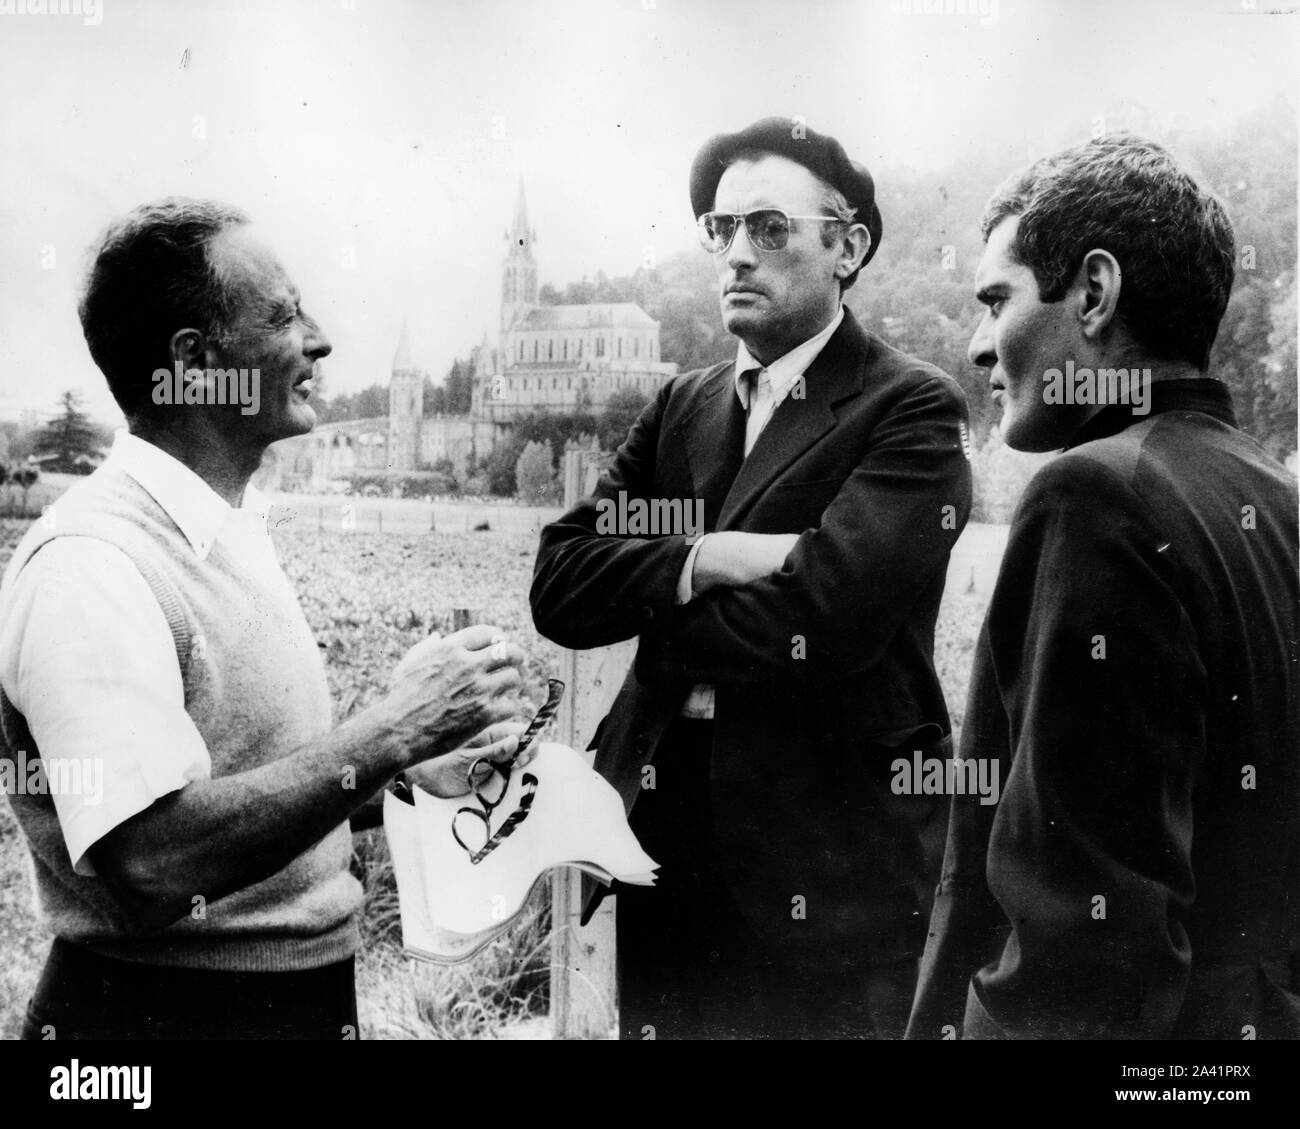 July 15, 1963 - Lourdes, France - Actor GREGORY PECK, center, with OMAR SHARIF, right, and producer FRED ZINNEMANN during the production of the film,'Behold a Pale Horse' which was filmed at the Lourdes Pilgrimage center. (Credit Image: © Keystone Press Agency/Keystone USA via ZUMAPRESS.com) Stock Photo